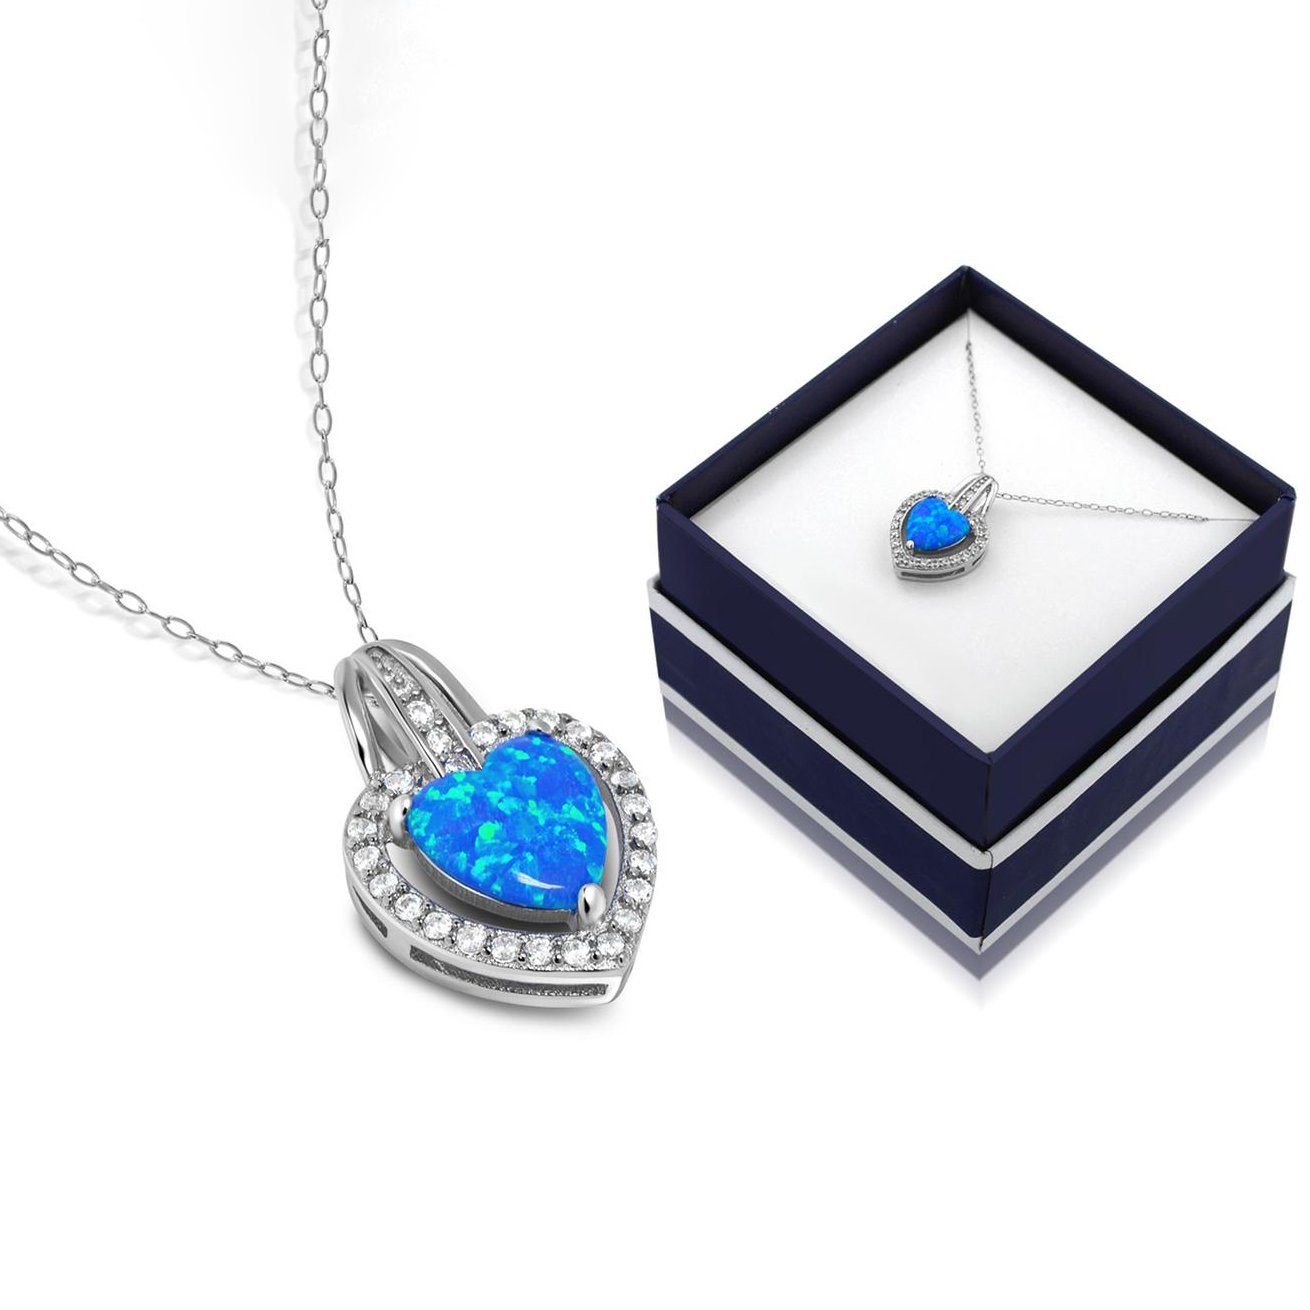 Solid Sterling Silver Blue Opal Heart Halo Necklace With Gift Box By MUIBLU Gems